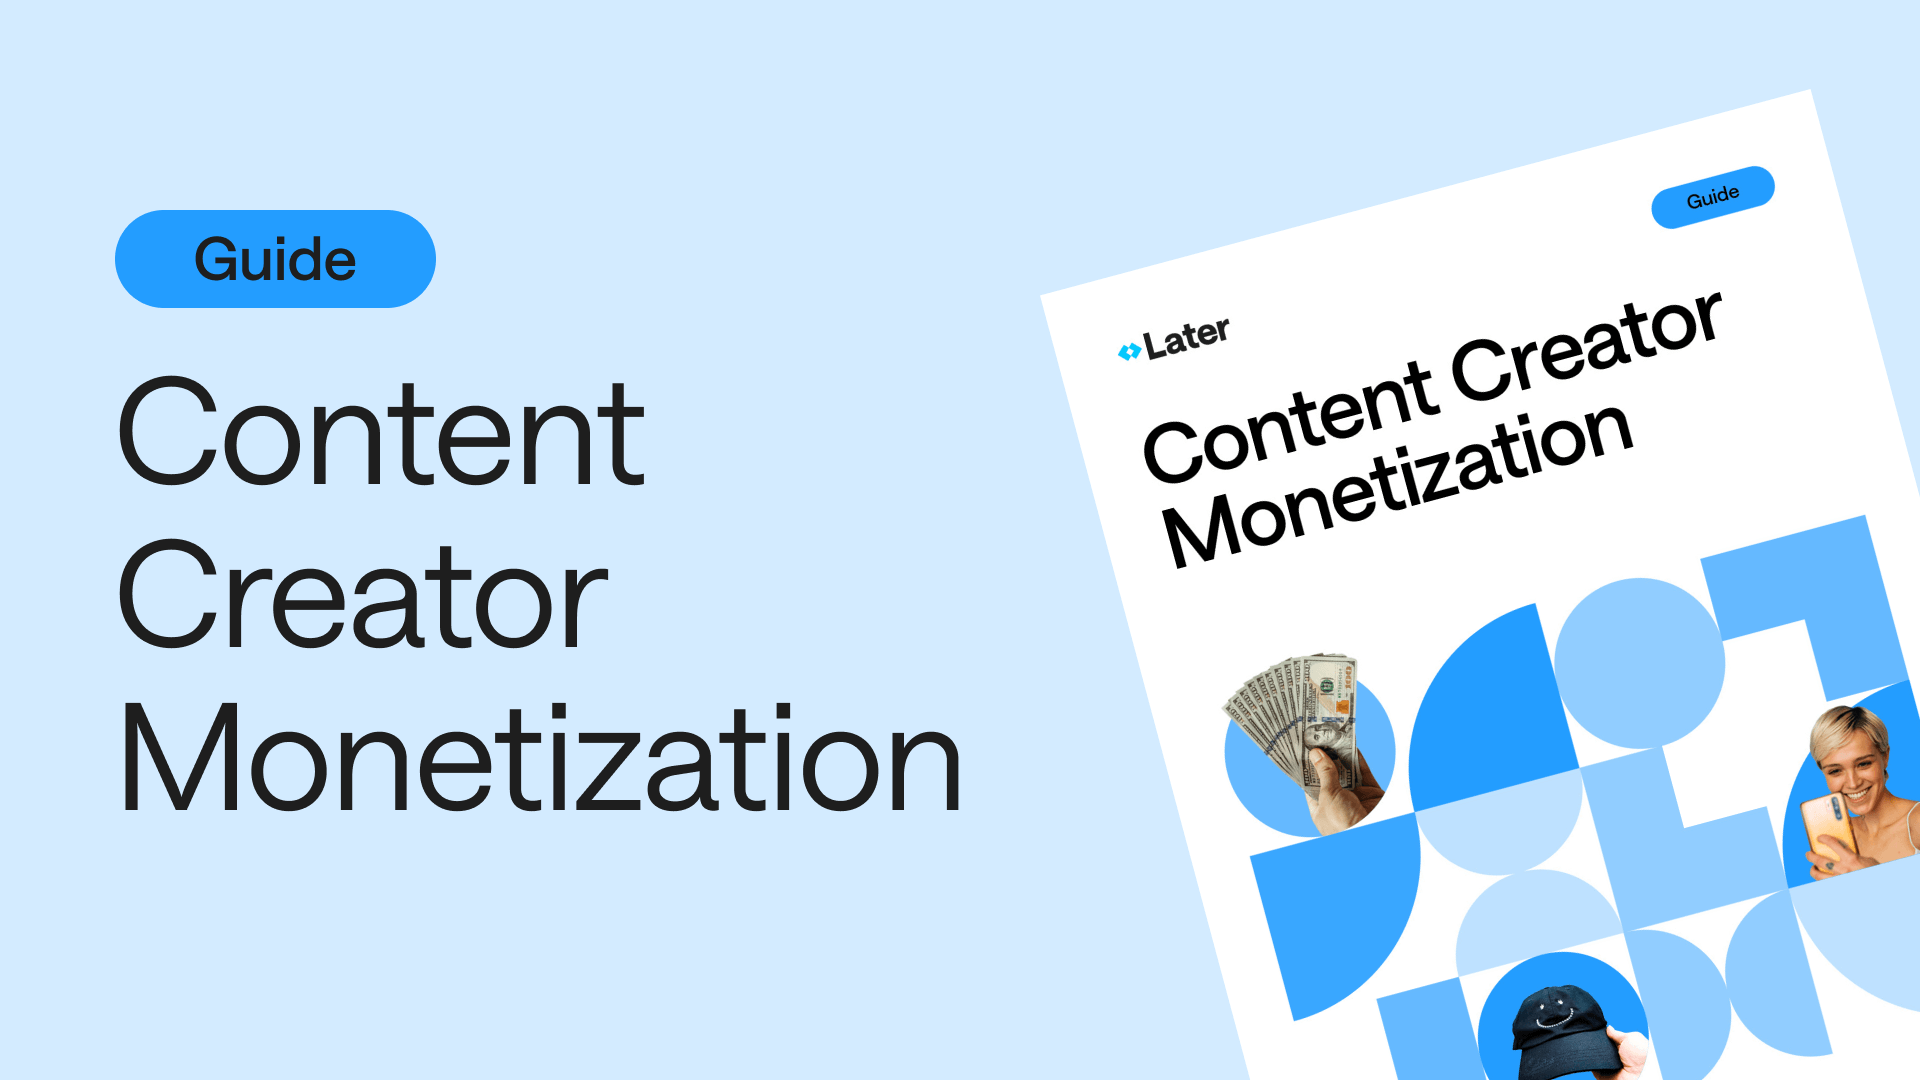 Your Guide to Content Creator Monetization thumbnail